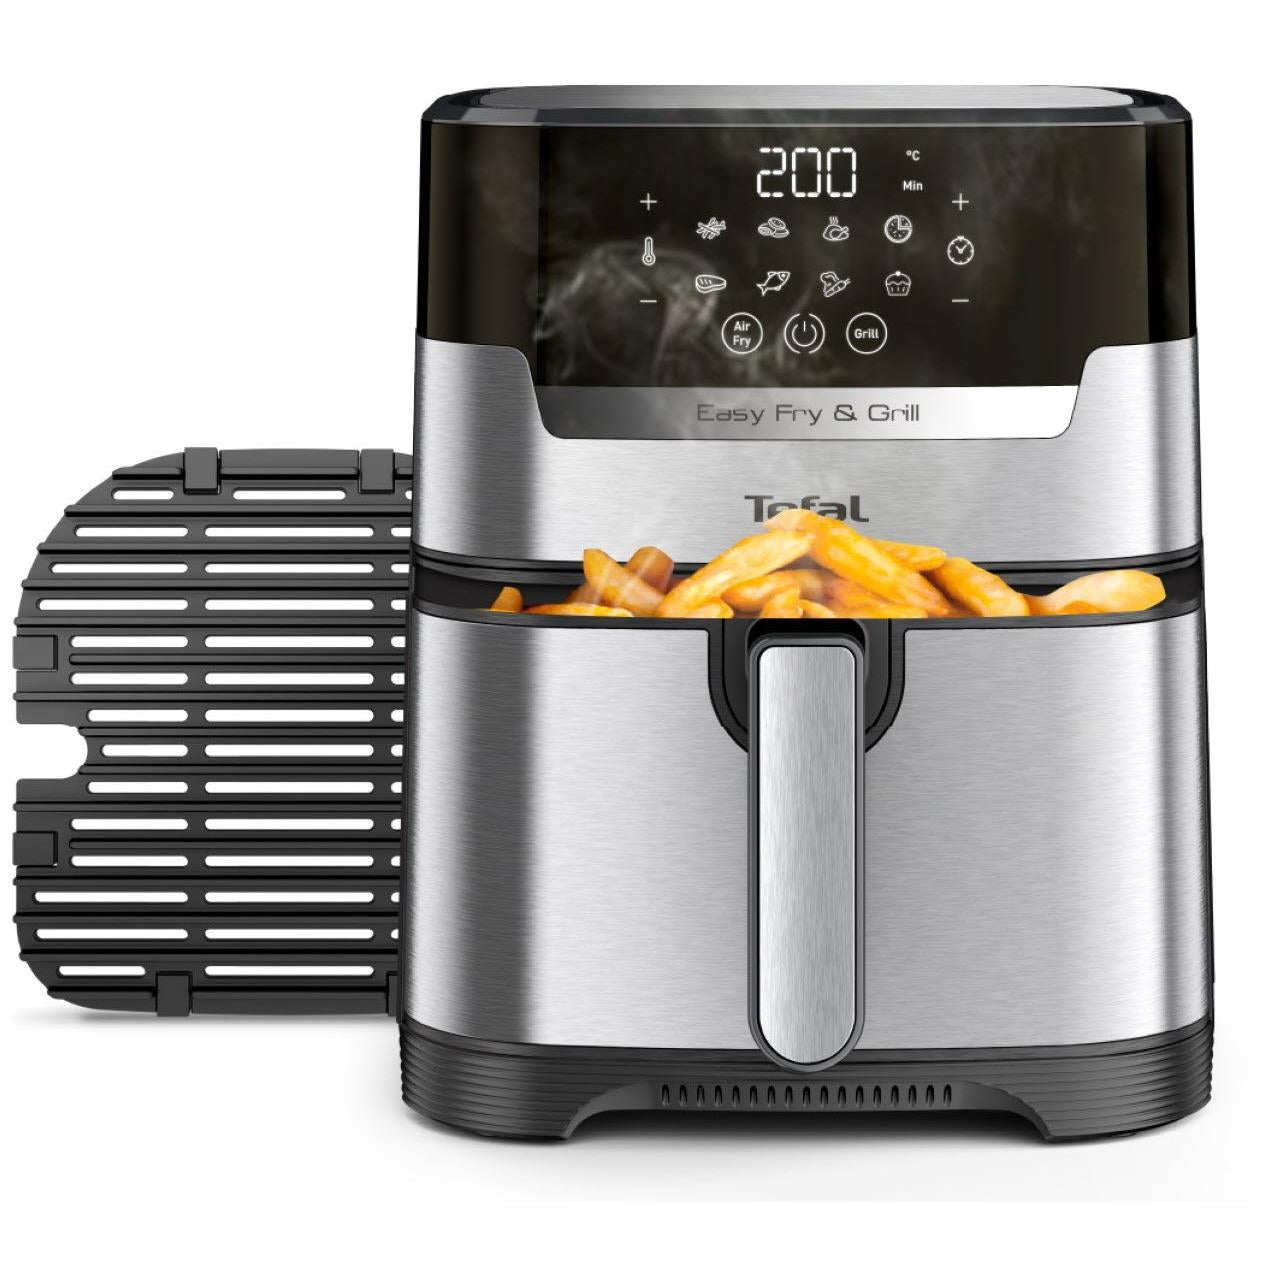 Easy Fry & Grill XXL Flexcook Air Fryer – Stainless Steel